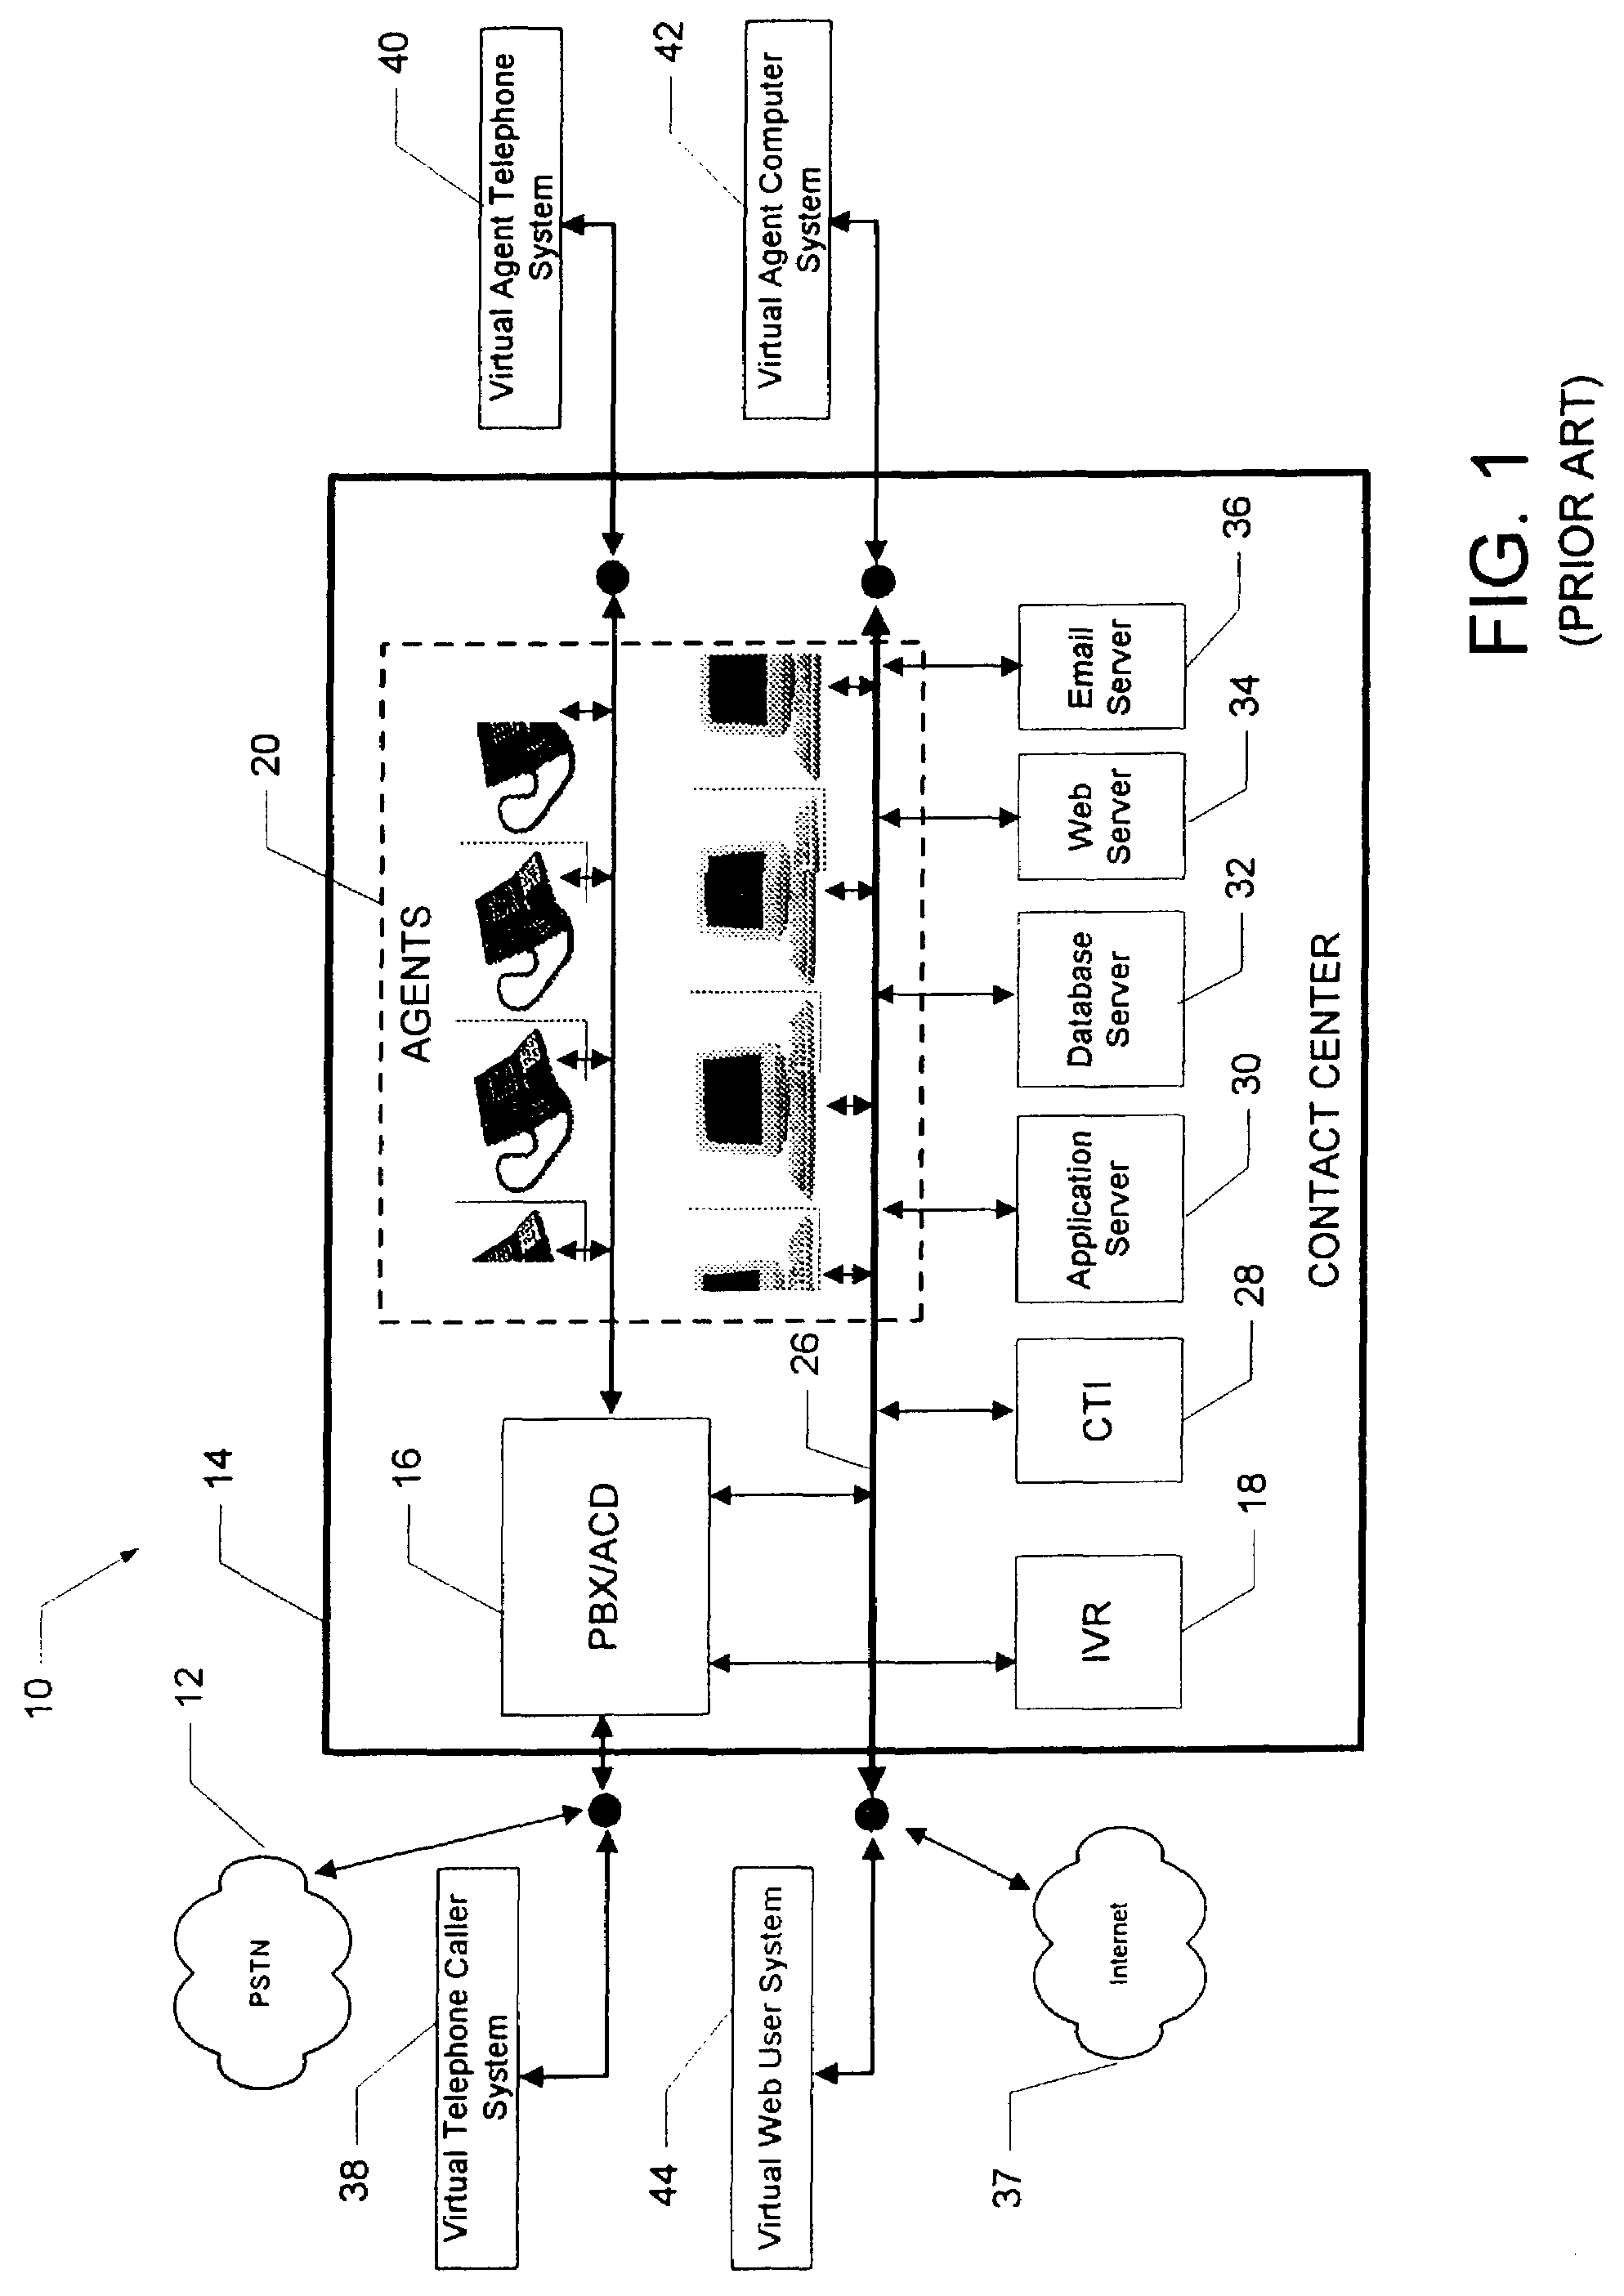 Method of generating test scripts using a voice-capable markup language